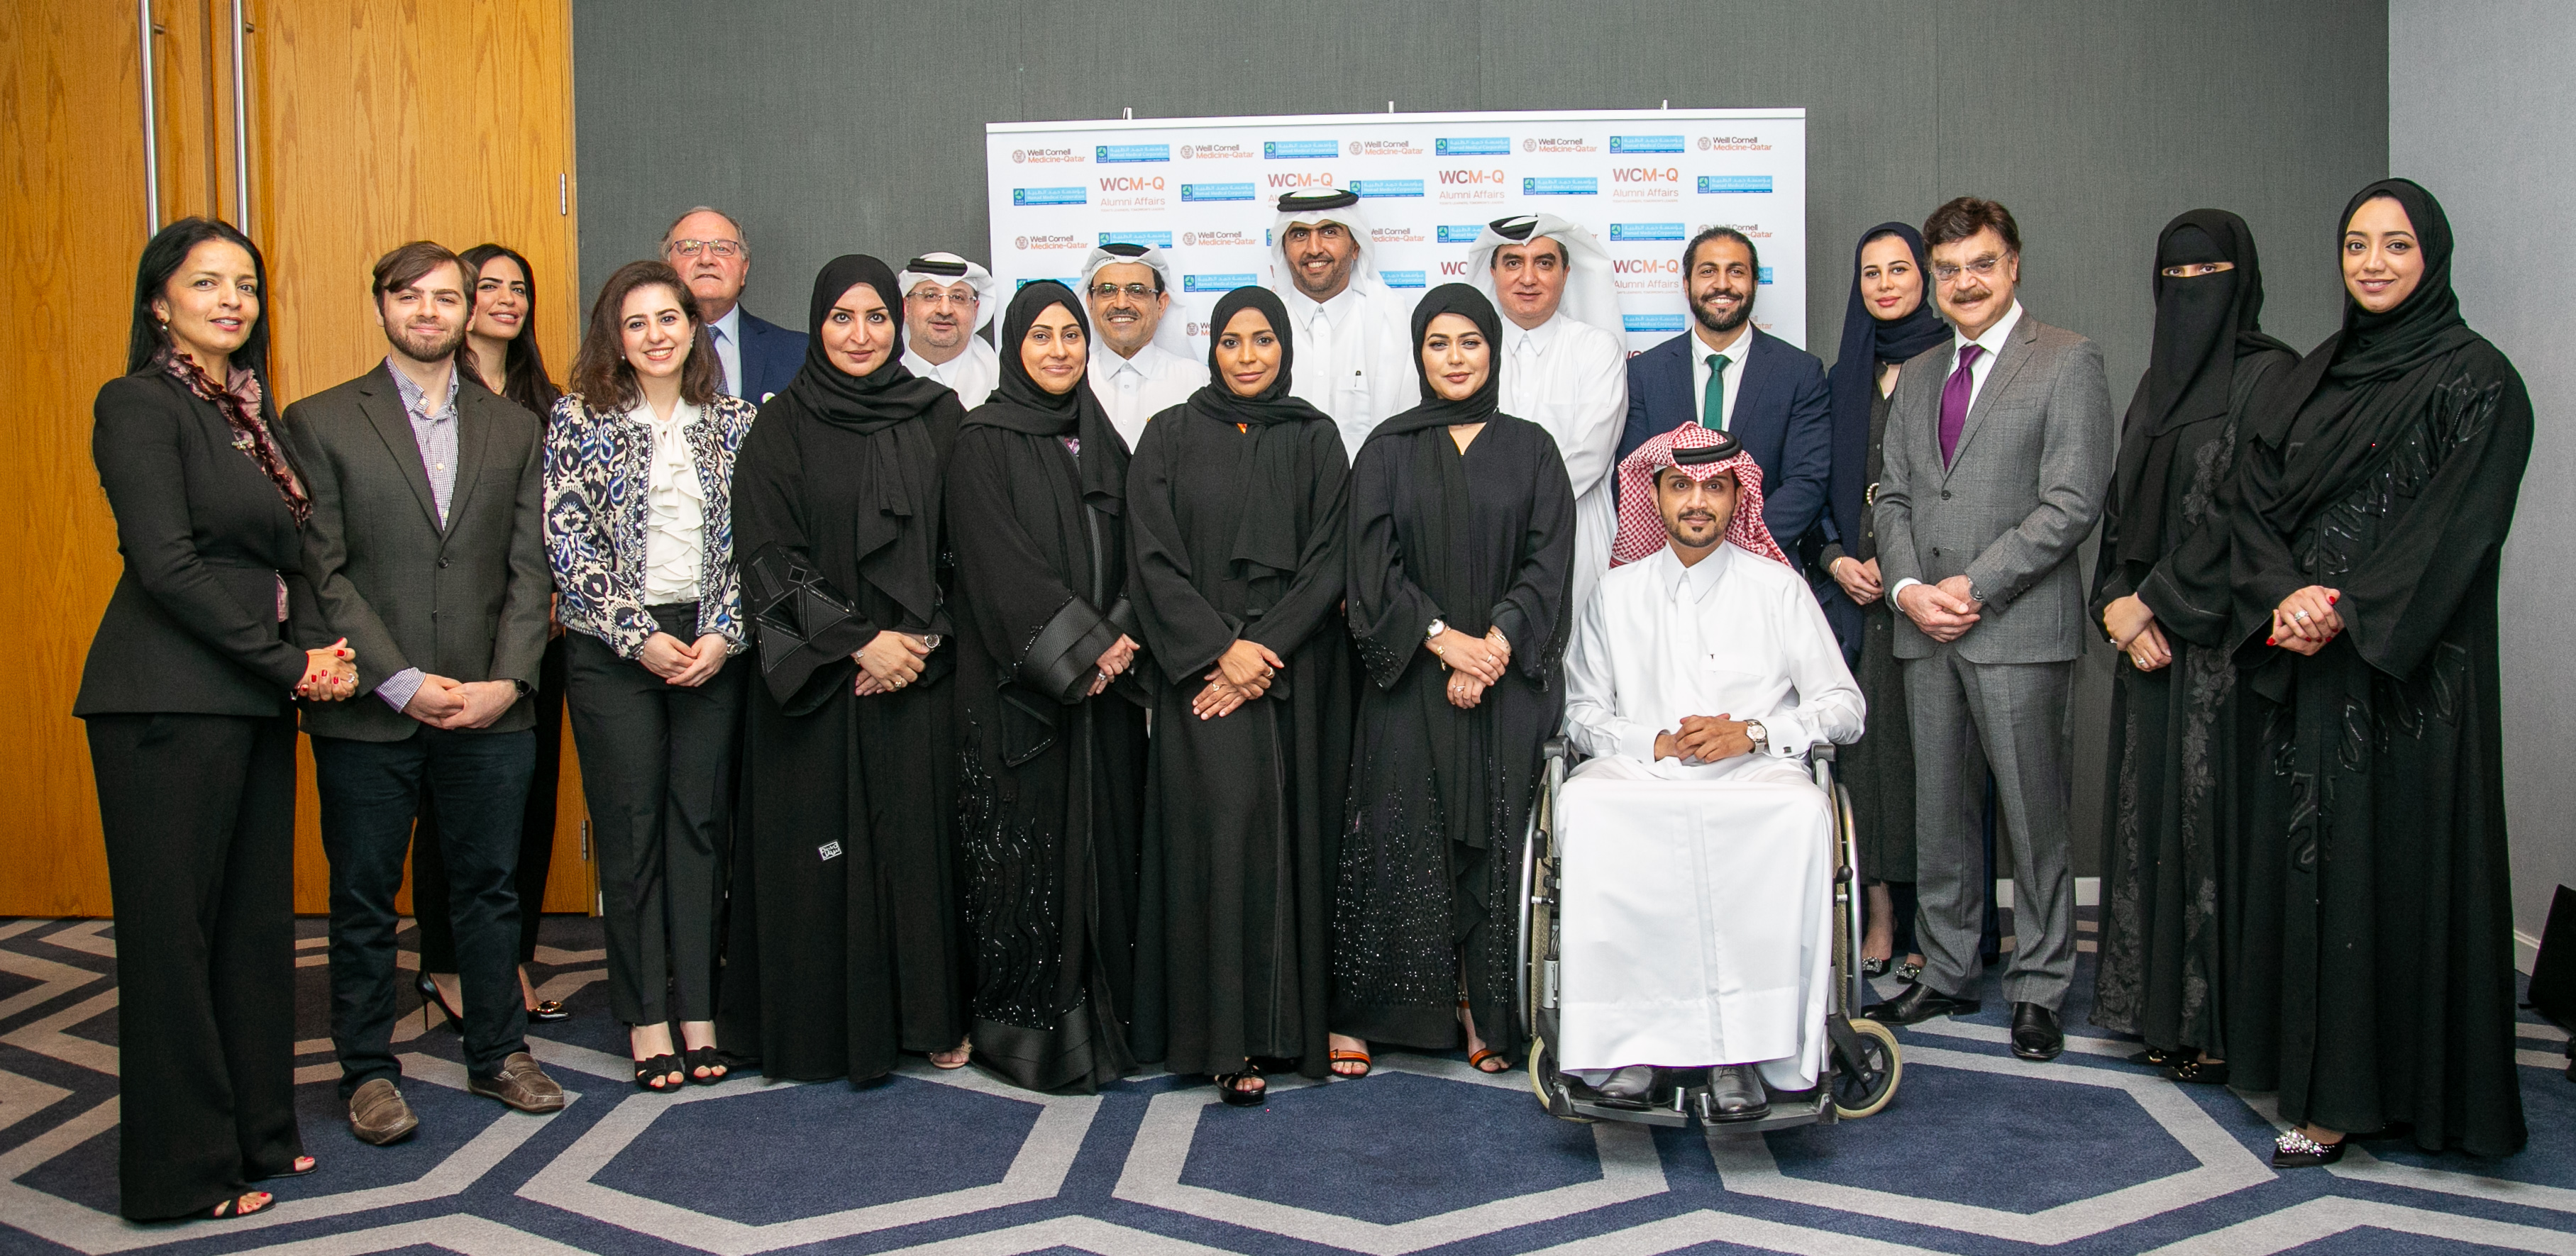 The 49 doctors were honored at a ceremony at the W Hotel following their successful completion of the internationally recognized ILM Level 5 Certificate in Leadership and Management.